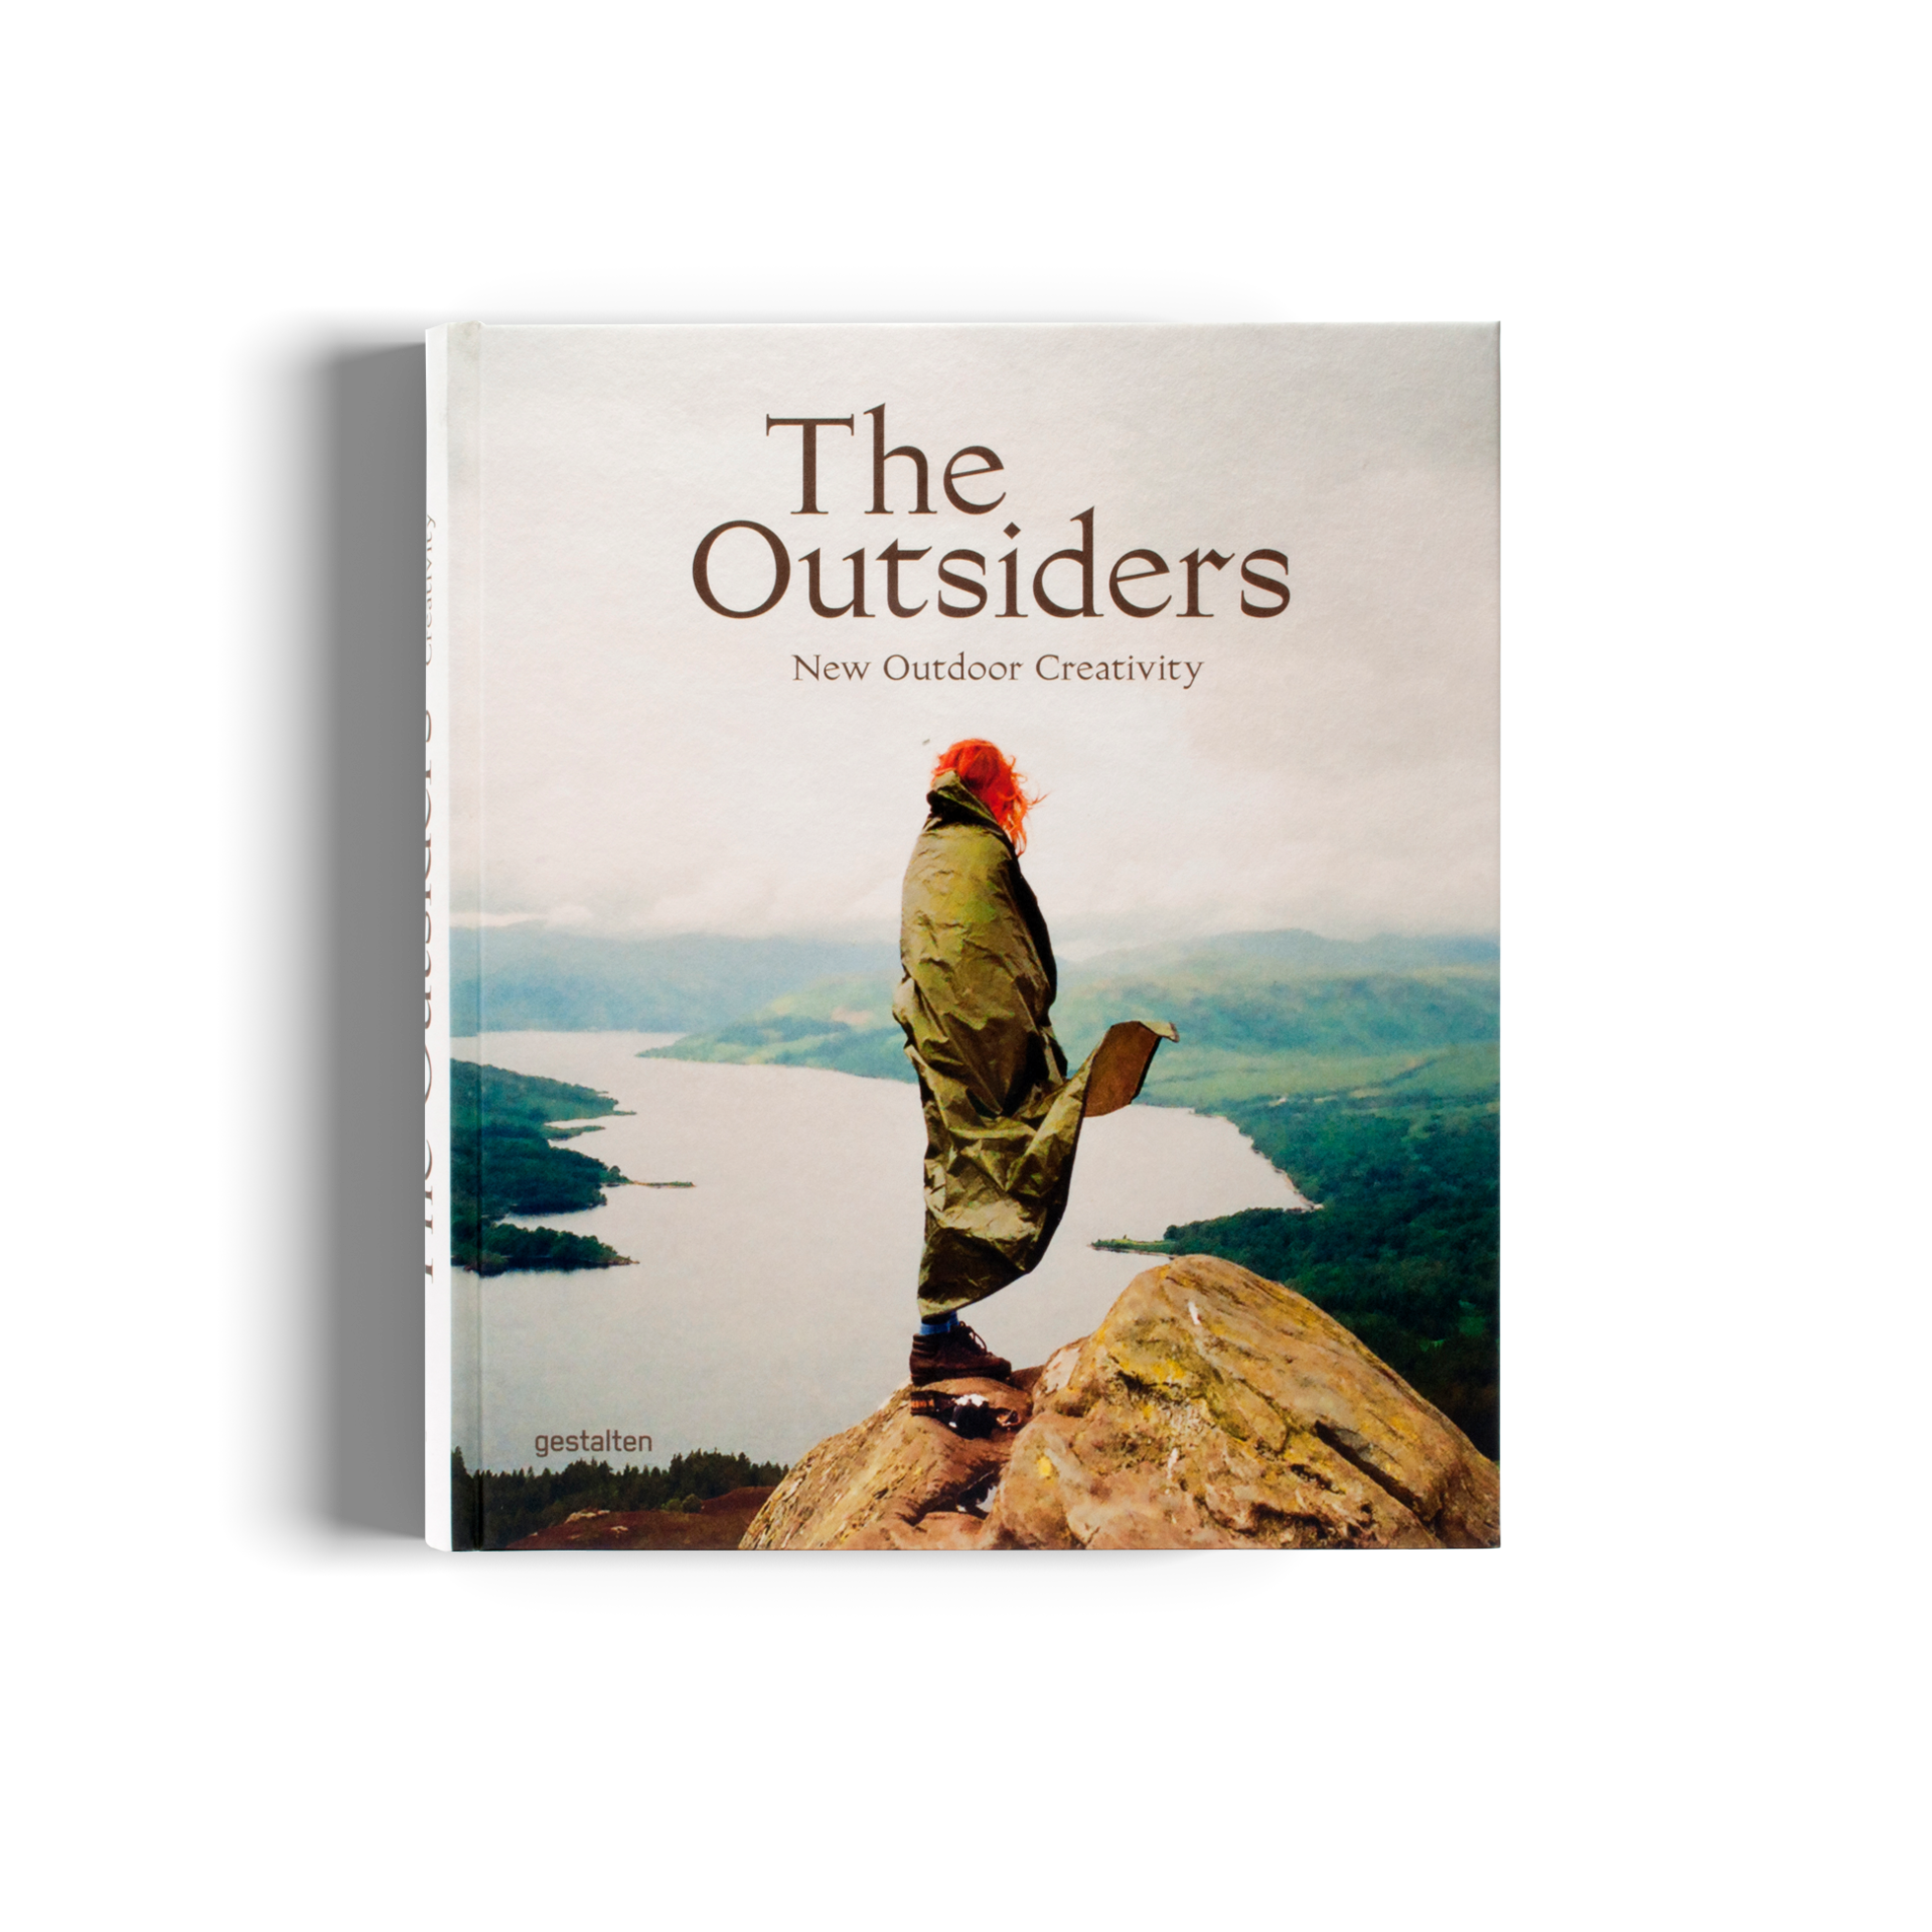 THE OUTSIDERS NEW OUTDOOR CREATIVITY